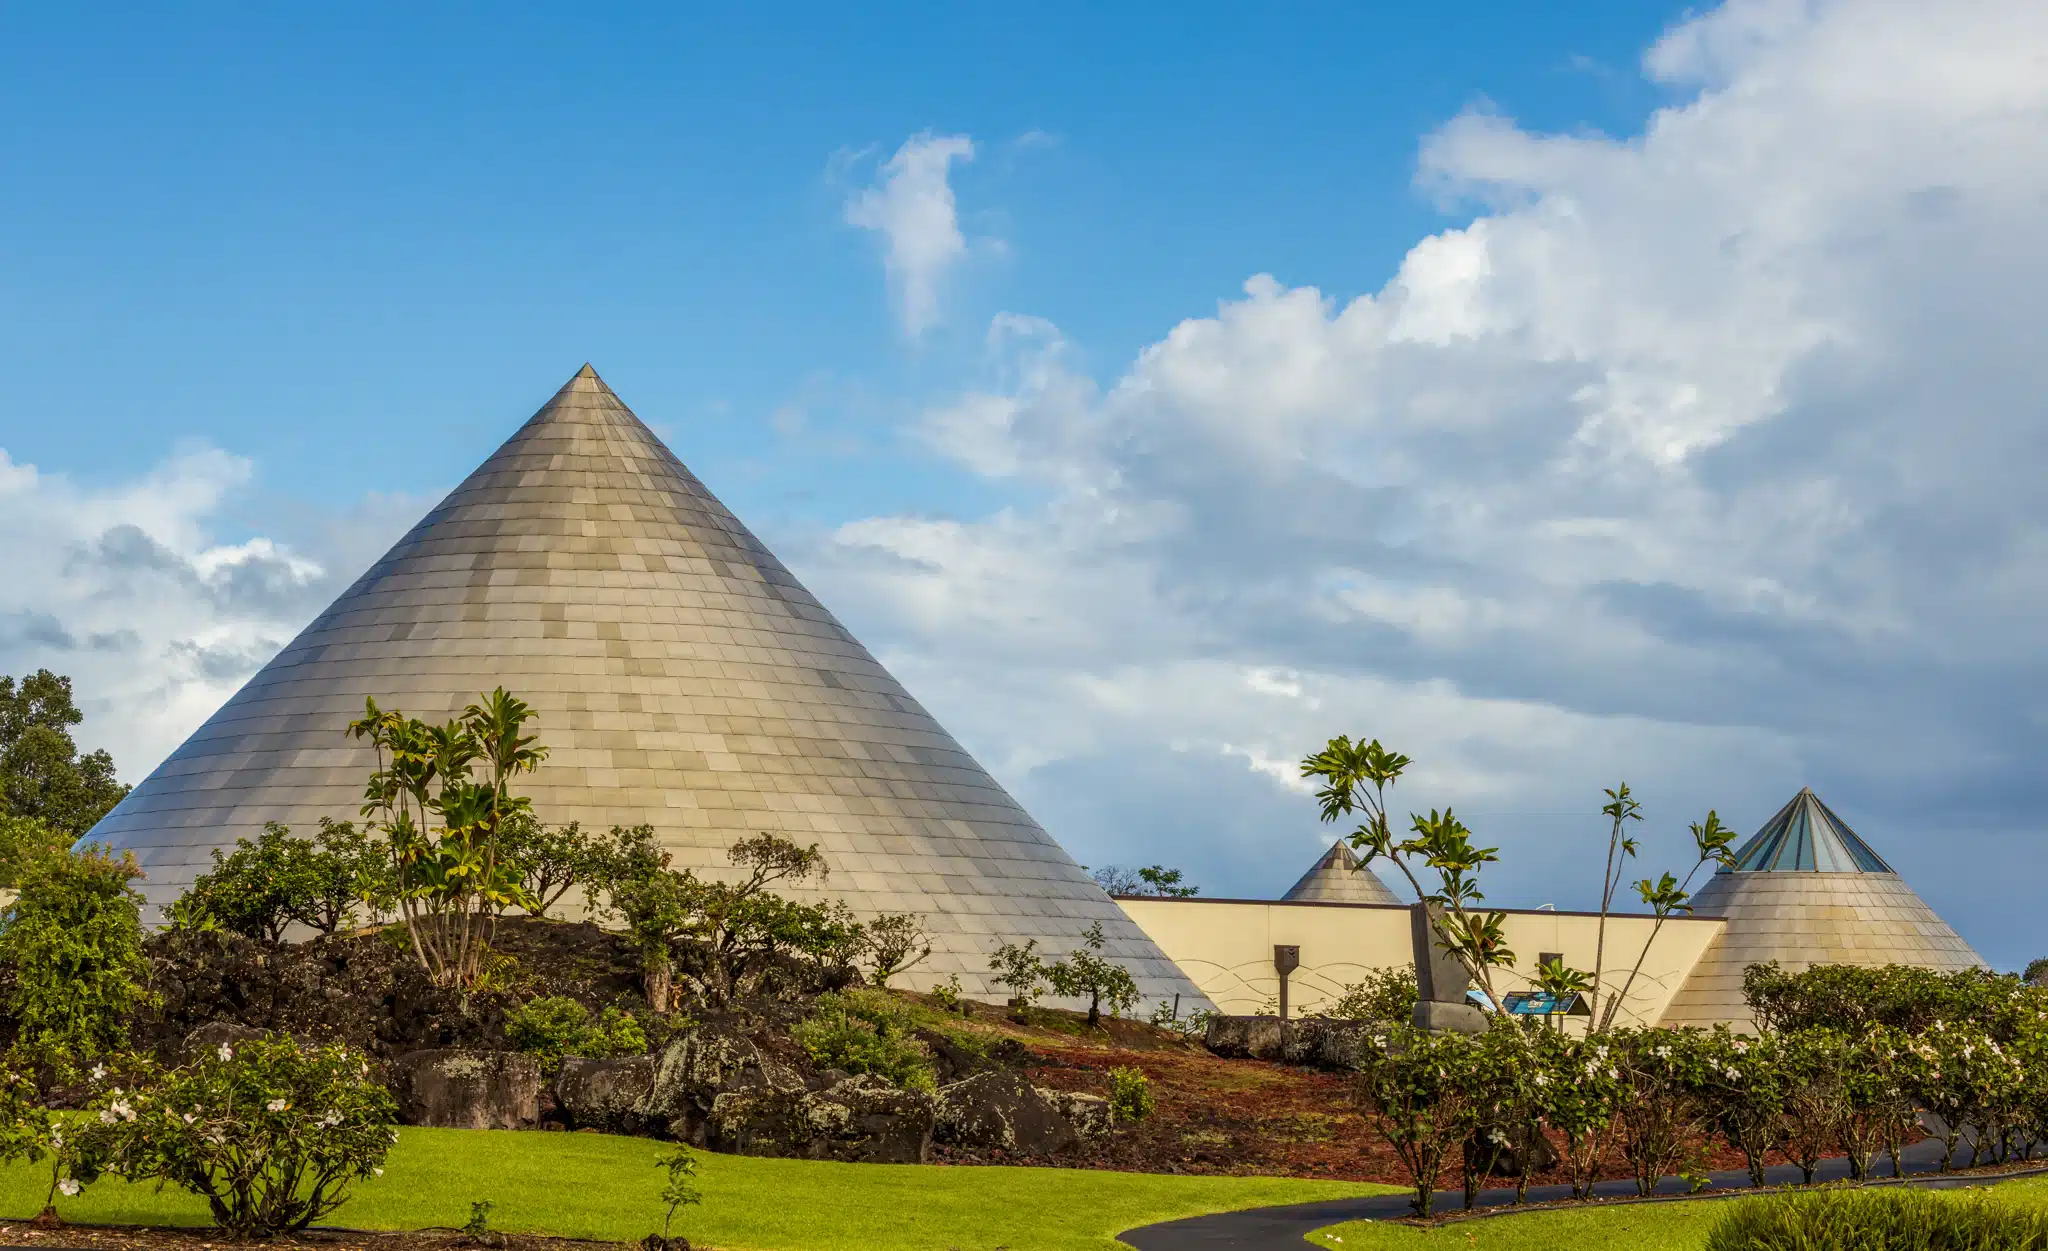 'Imiloa Astronomy Center is a Heritage Site located in the city of Hilo on Big Island, Hawaii